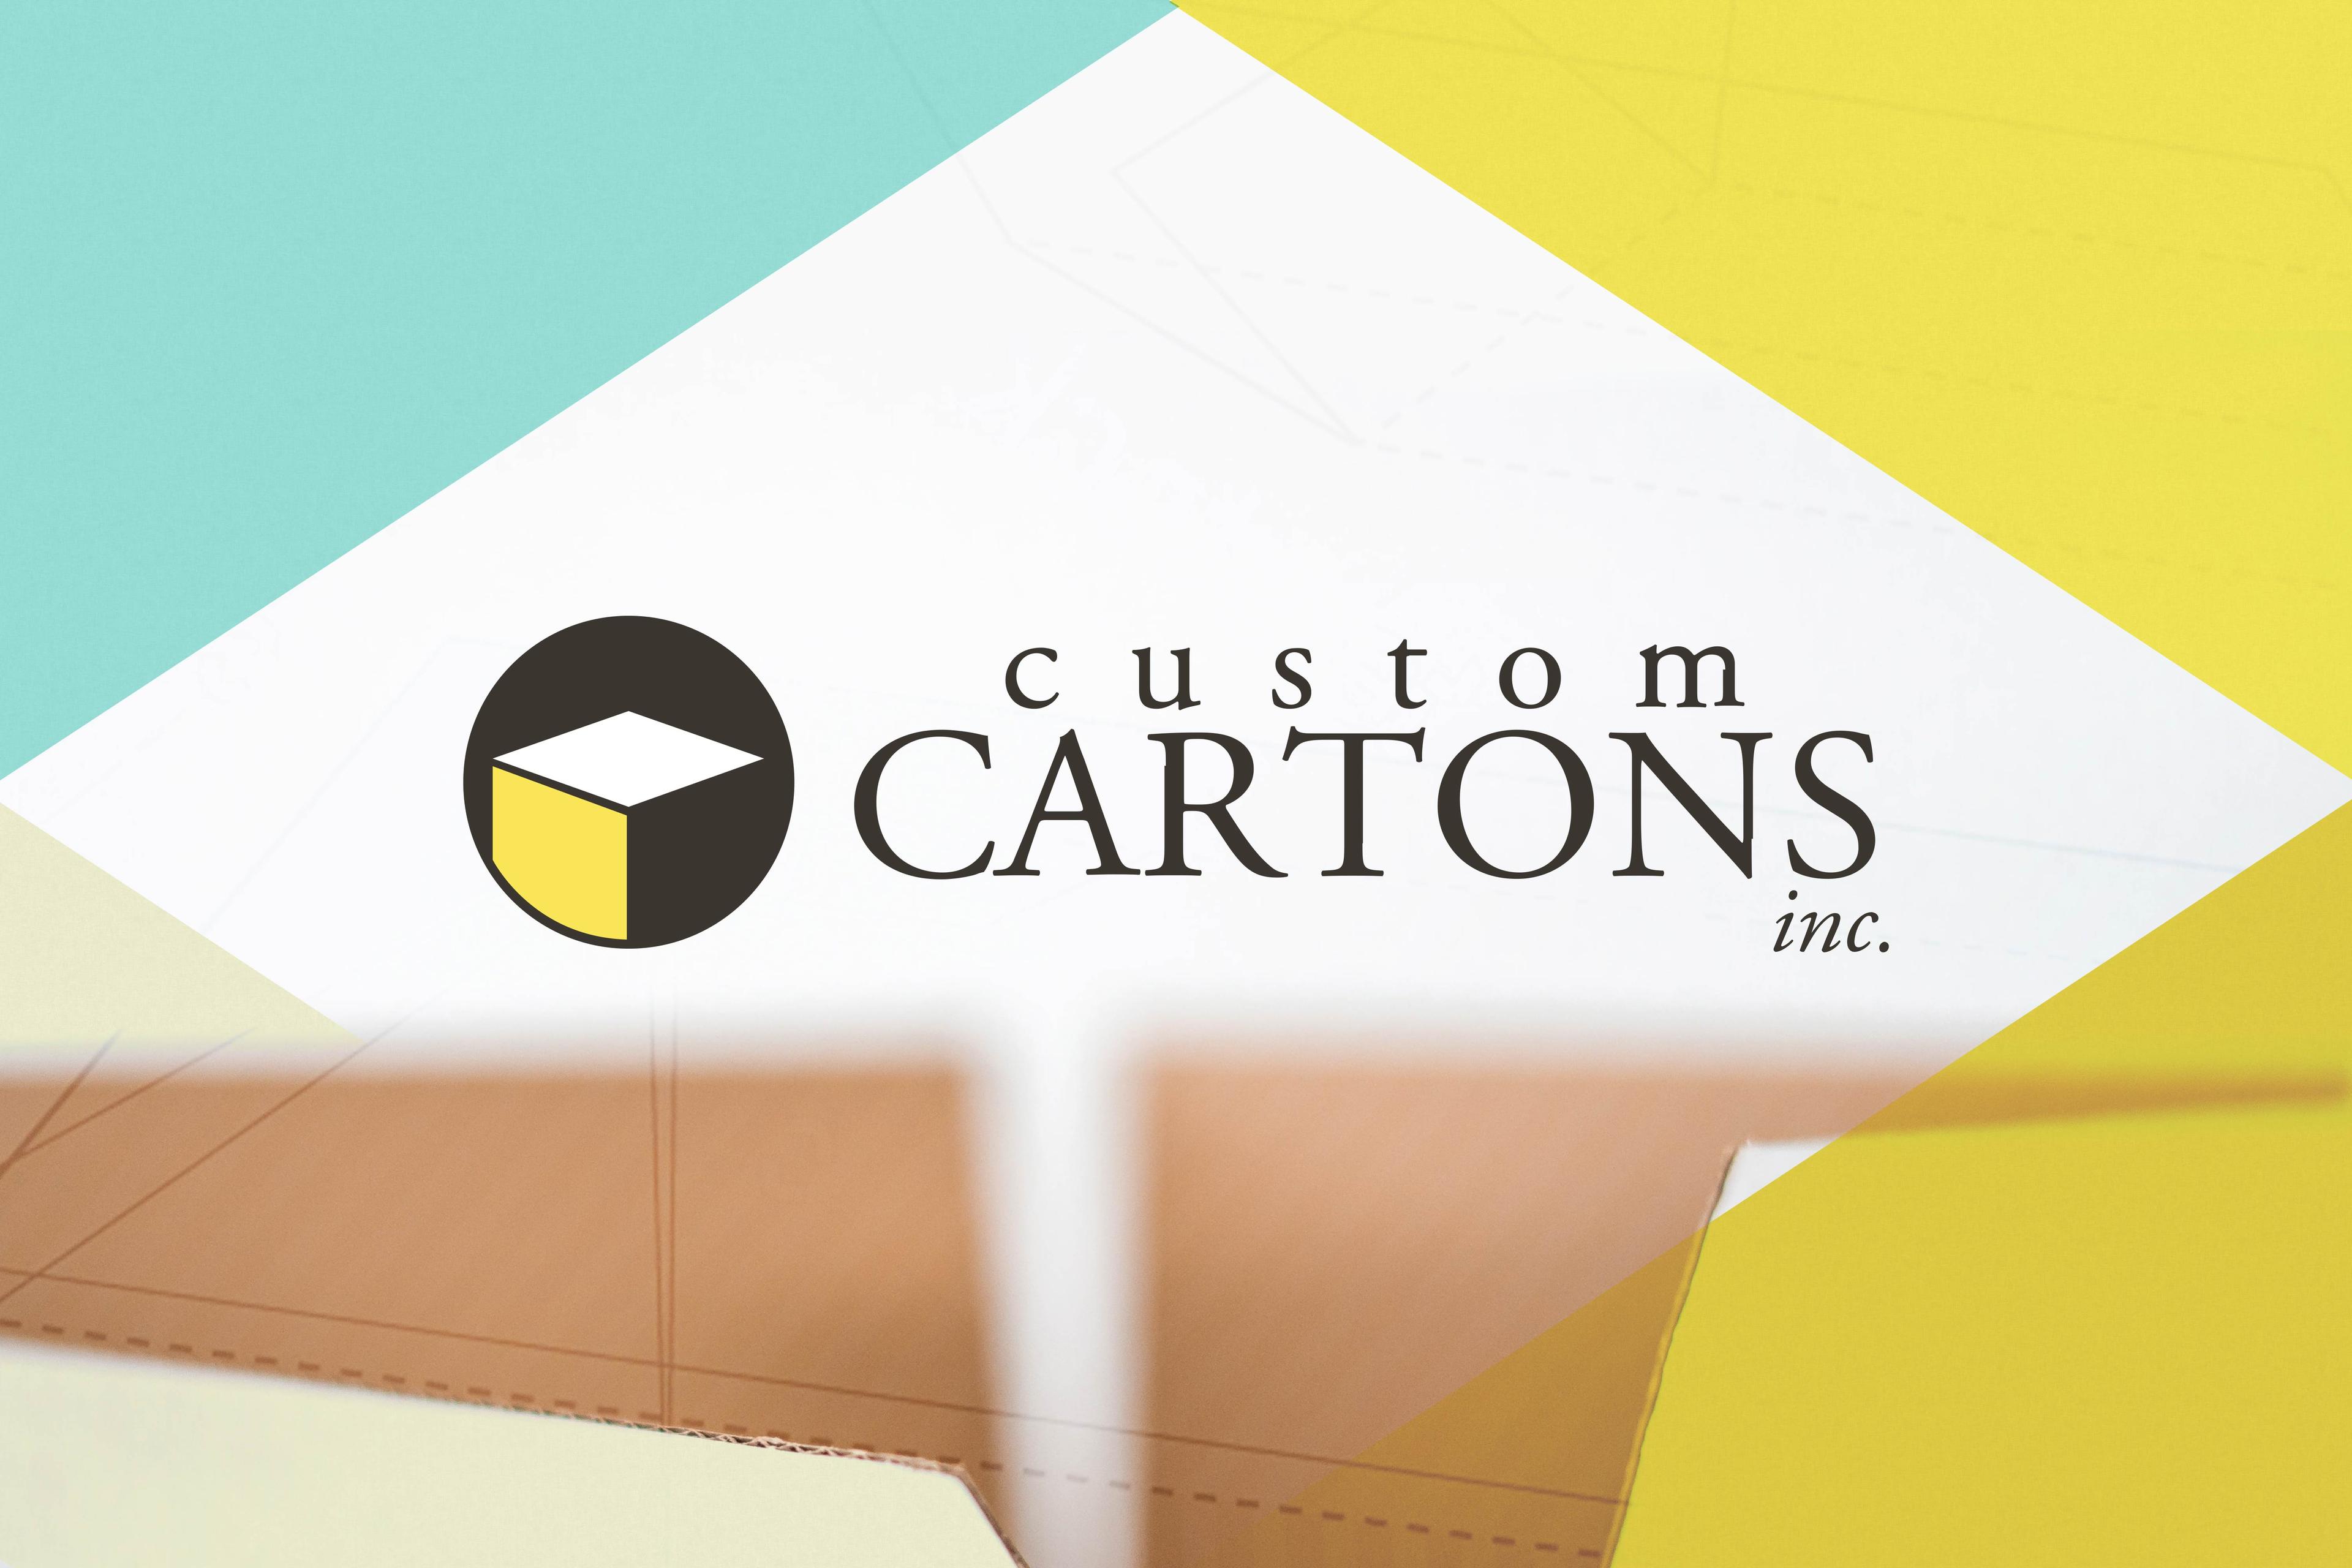 Product Create Your Custom Packaging - Custom Cartons Inc. | Customize every inch of your packing inside and out with high-quality materials and state of the art printing - for a finished box that will leave a lasting impression image